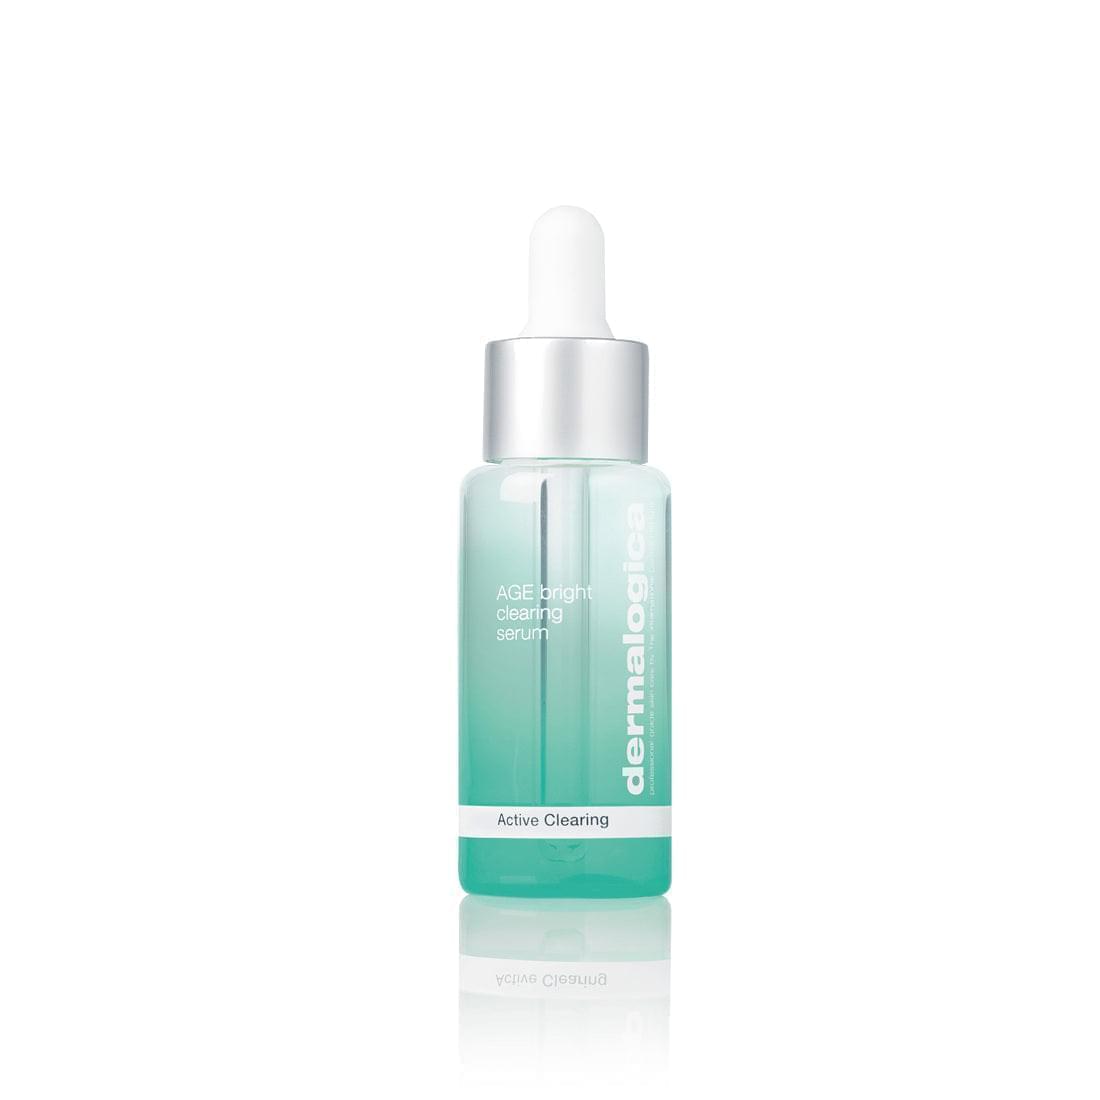 Dermalogica Age Bright Clearing Serum - Heaven Therapy Skincare (7156821983392)